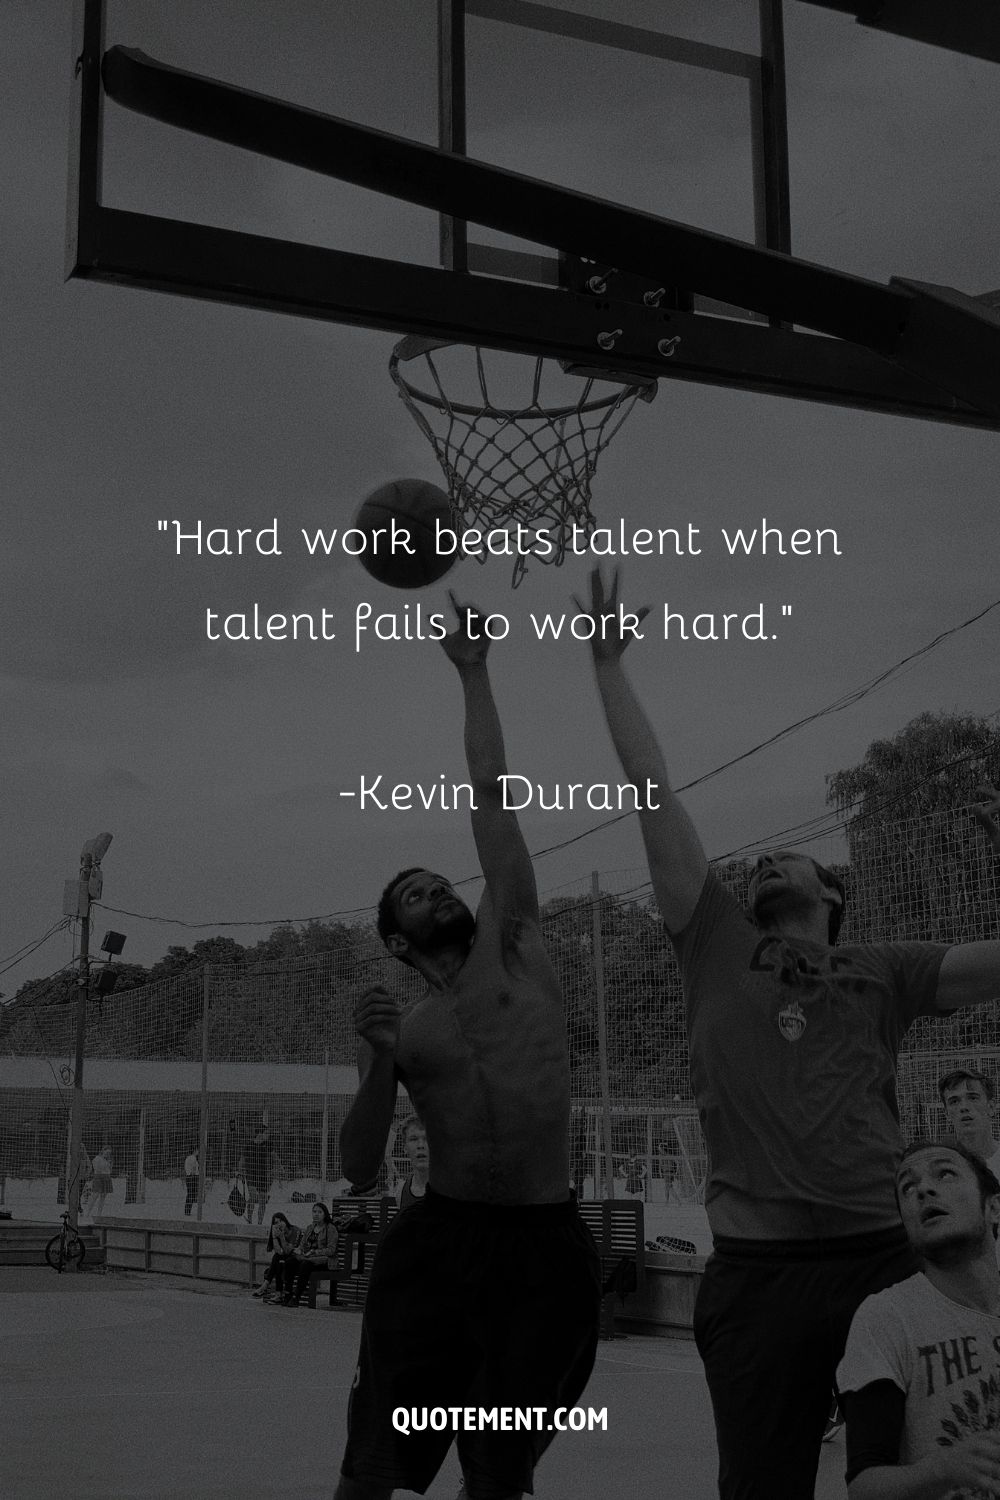 Image of an outdoor court with a short hard work quote.
